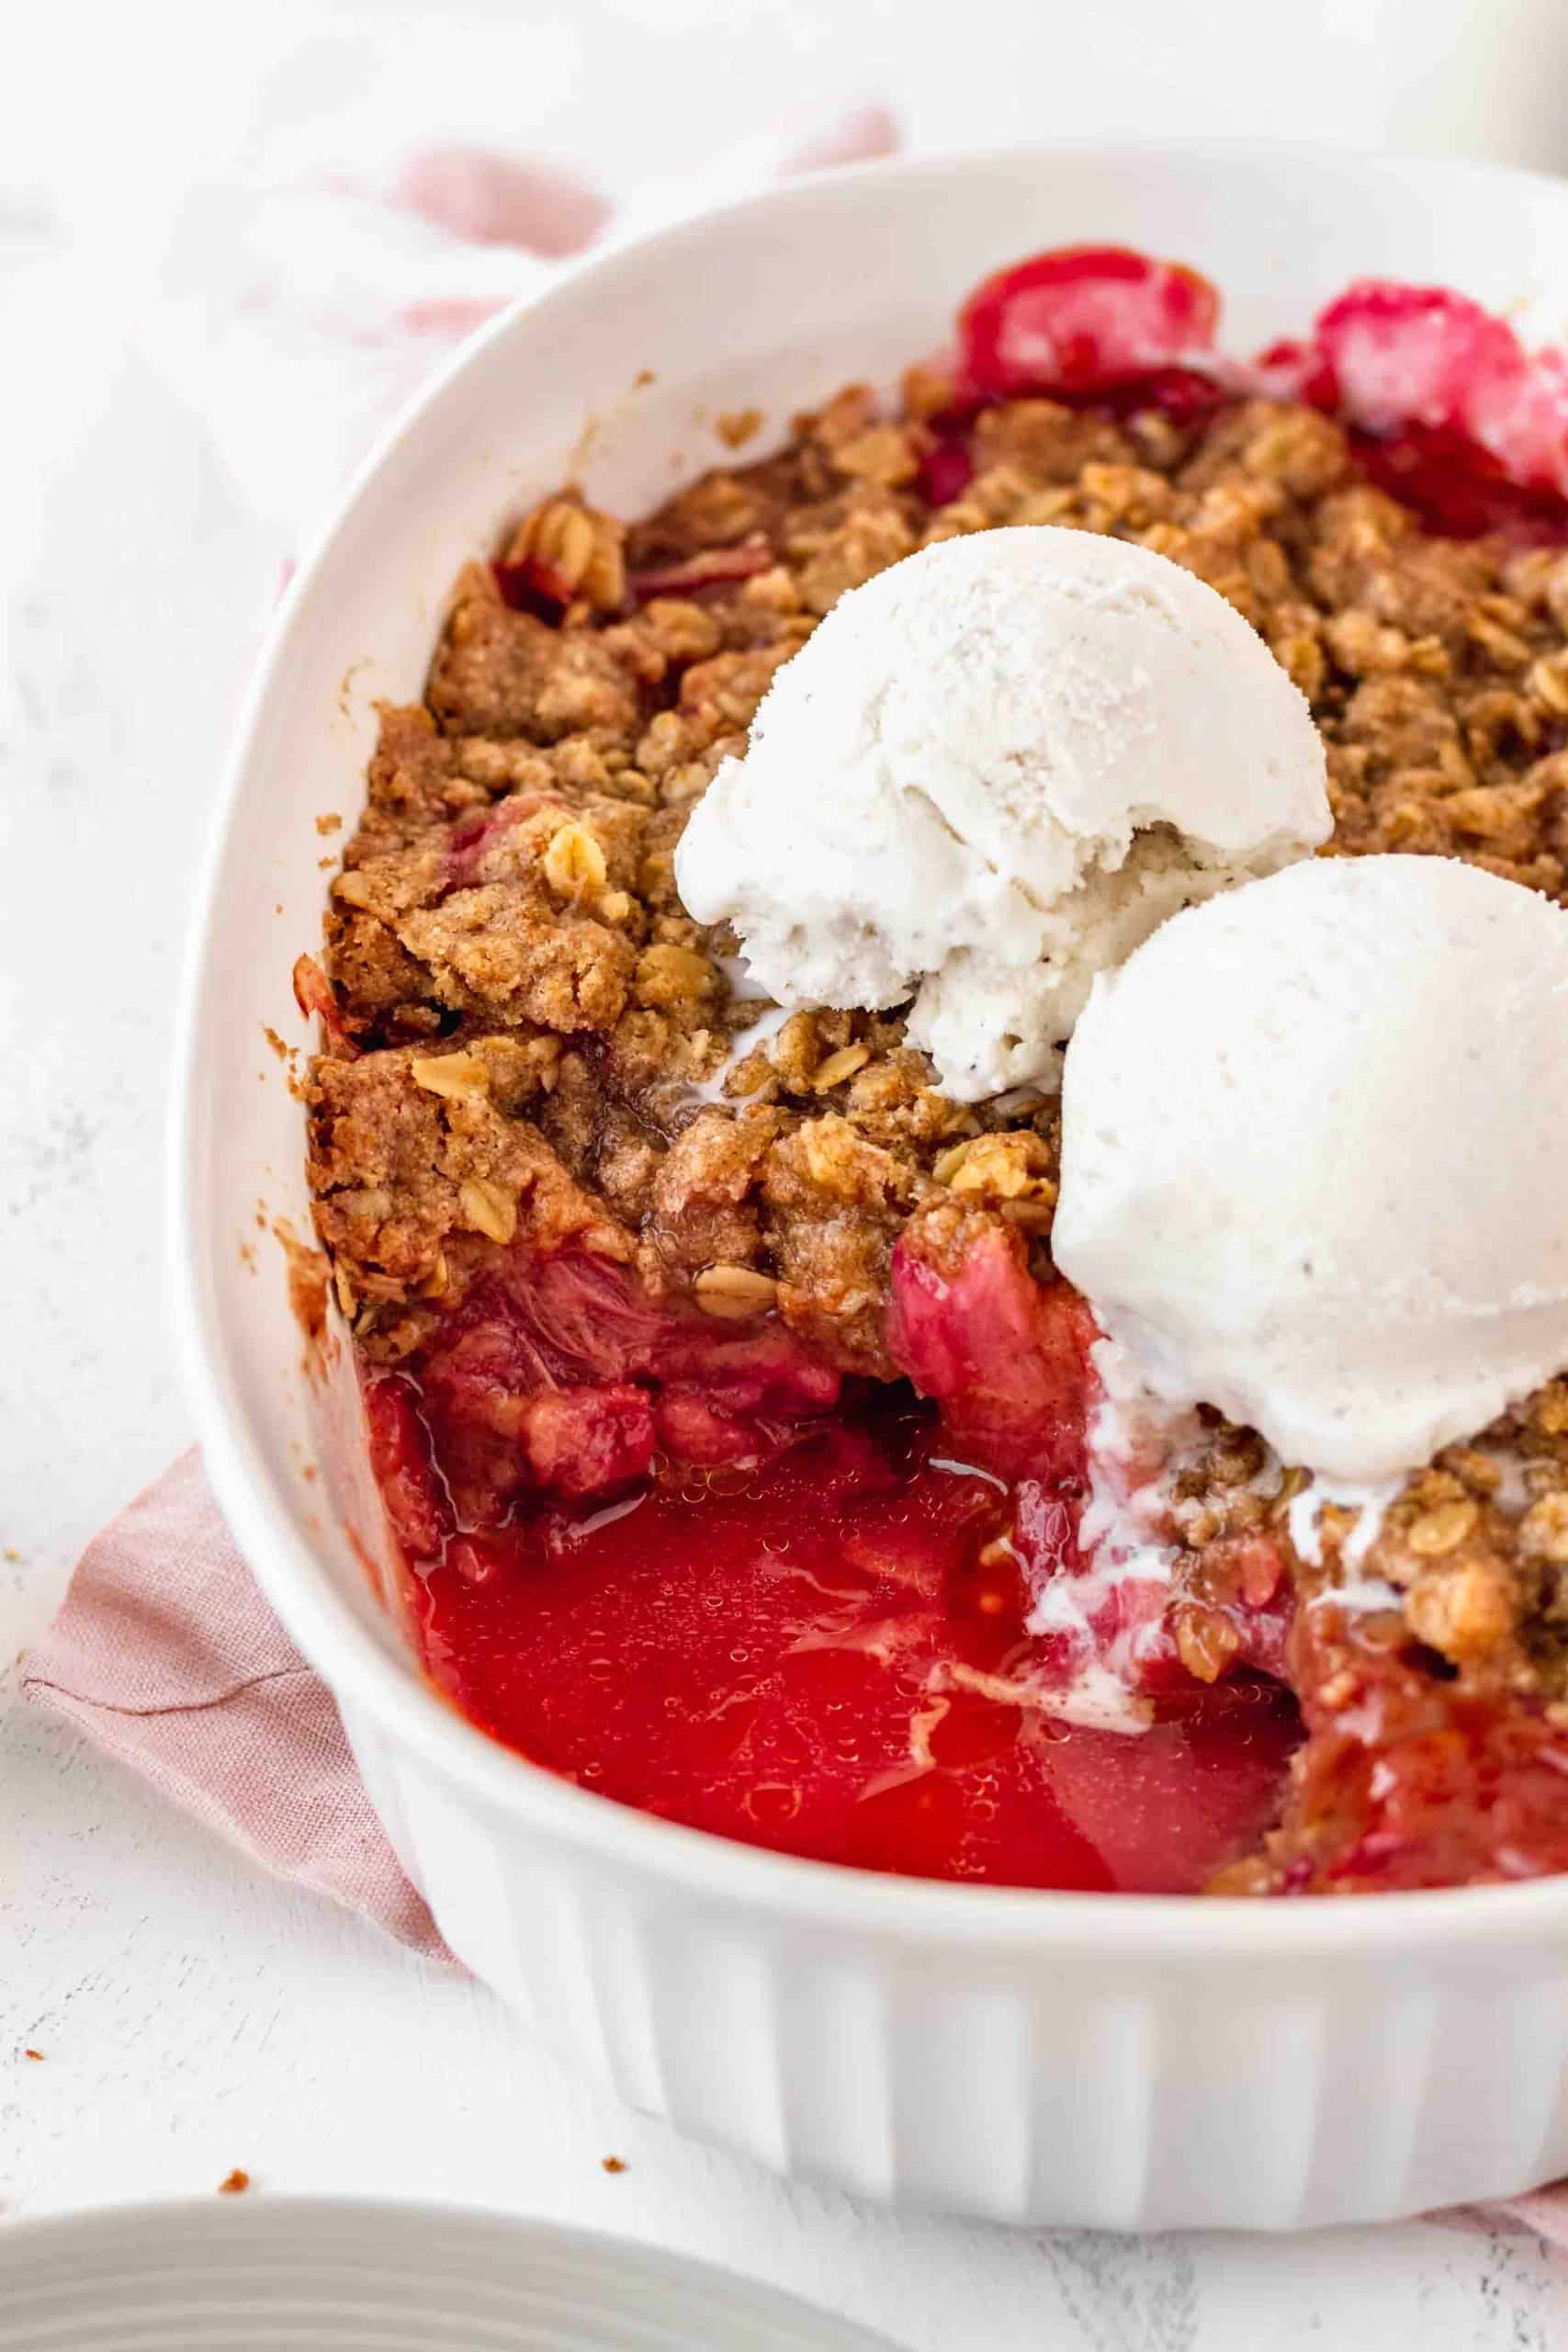 Rhubarb crisp with a portion taken out